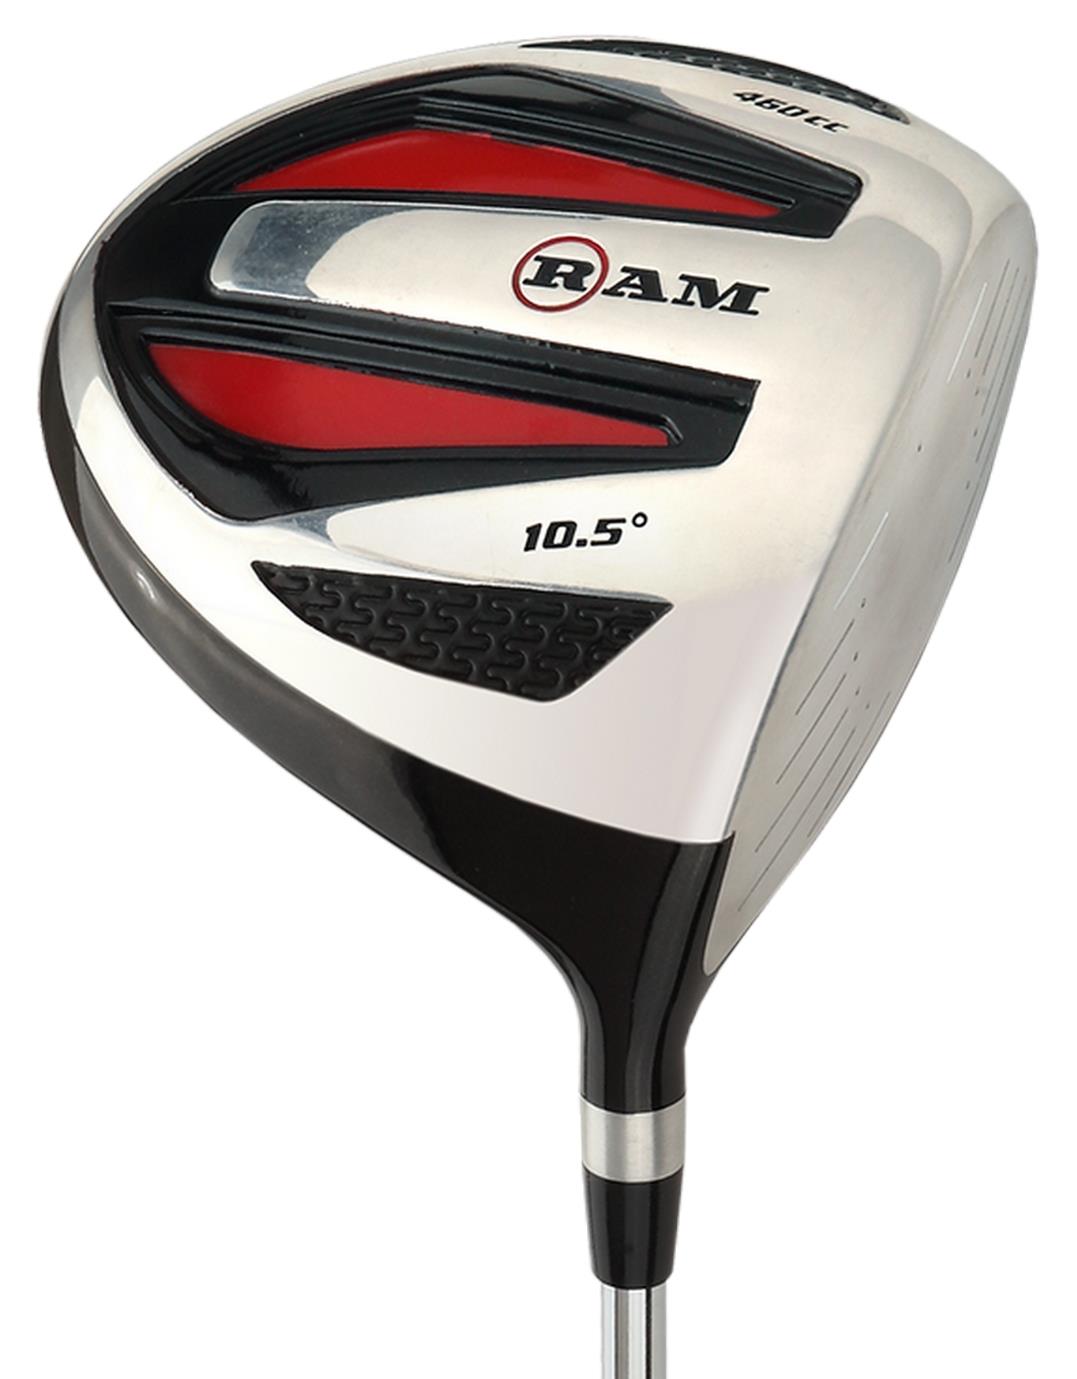 Ram Golf SGS 460cc Driver Mens Right Hand Headcover Included Steel Shaft